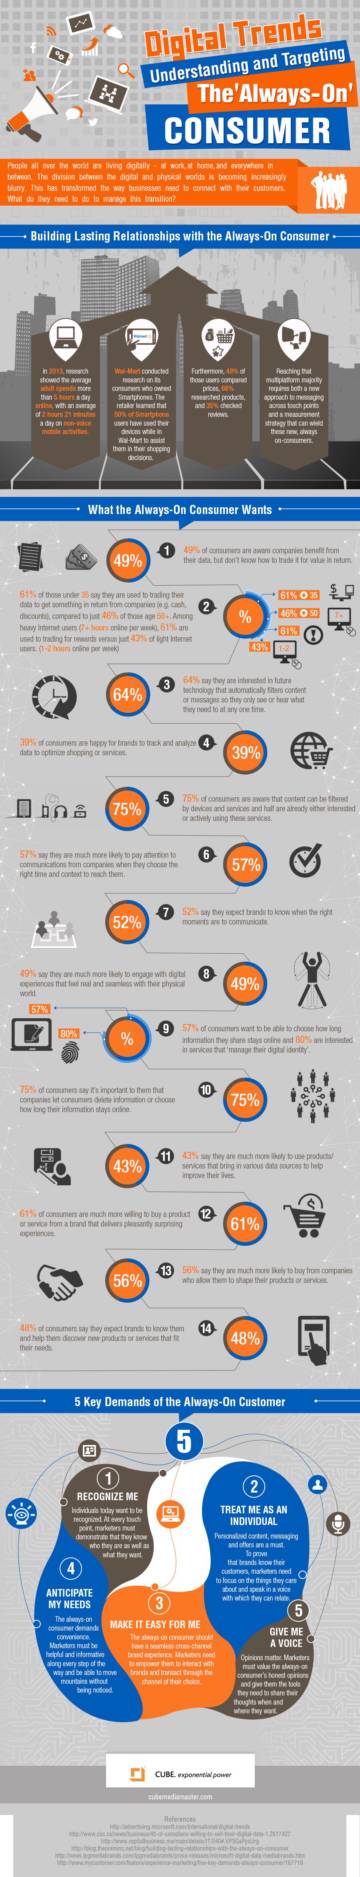 an infographic explaining the latest digital trends to target consumers effectively